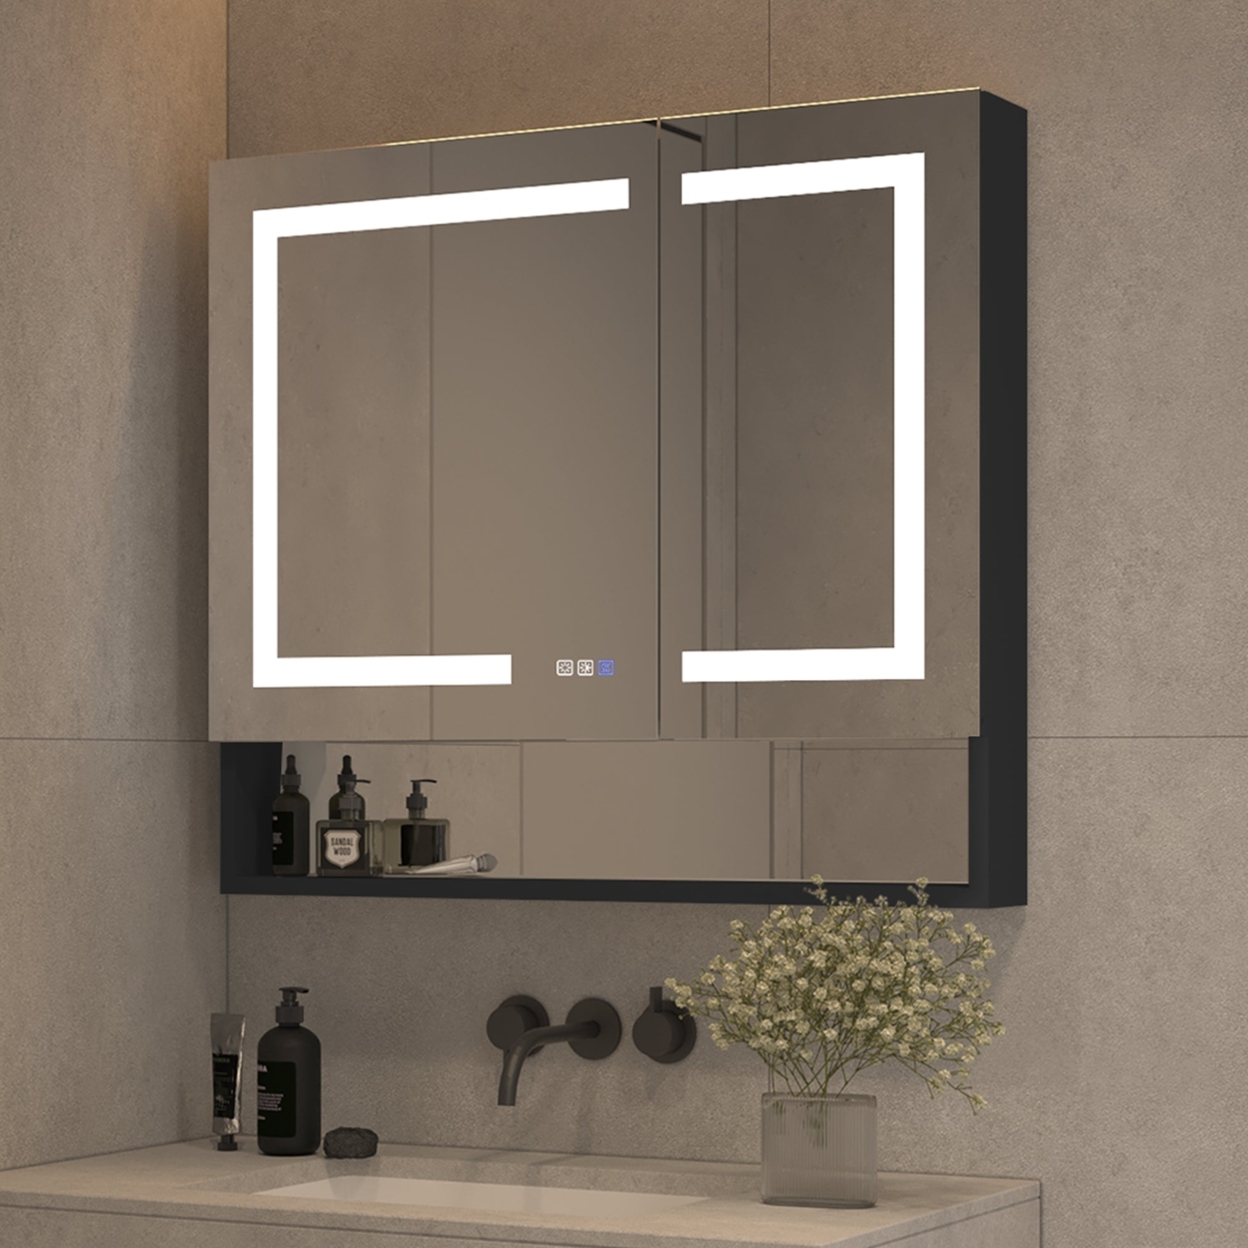 ExBrite 36 x 32 inch LED Lighted Mirror Black Medicine Cabinet with Shelves for Bathroom Recessed or Surface Mount